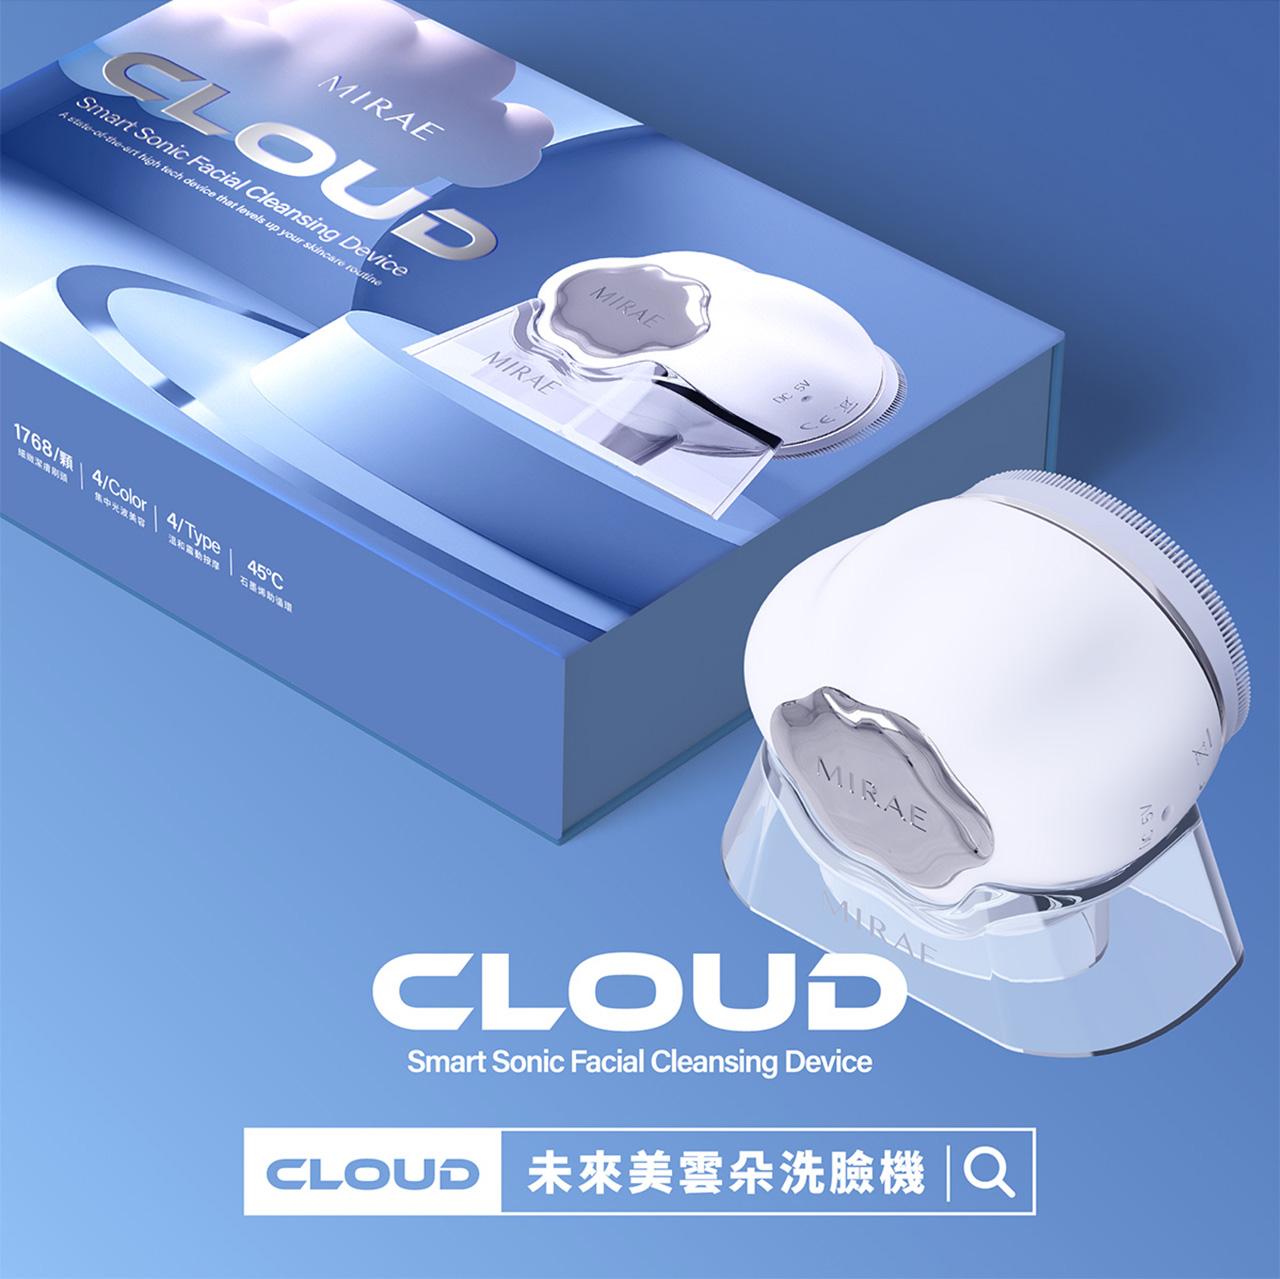 MIRAECLOUDSmart Sonic Facial Cleansing DeviceA stateofthe-art high tech device that levels up your skincare routineMIRAE1768/4/Color 4/Type45C光波美容 溫和石墨烯MIRAEMIRAECLOUDSmart Sonic Facial Cleansing DeviceCLOUD 未來美雲朵洗臉機 Q